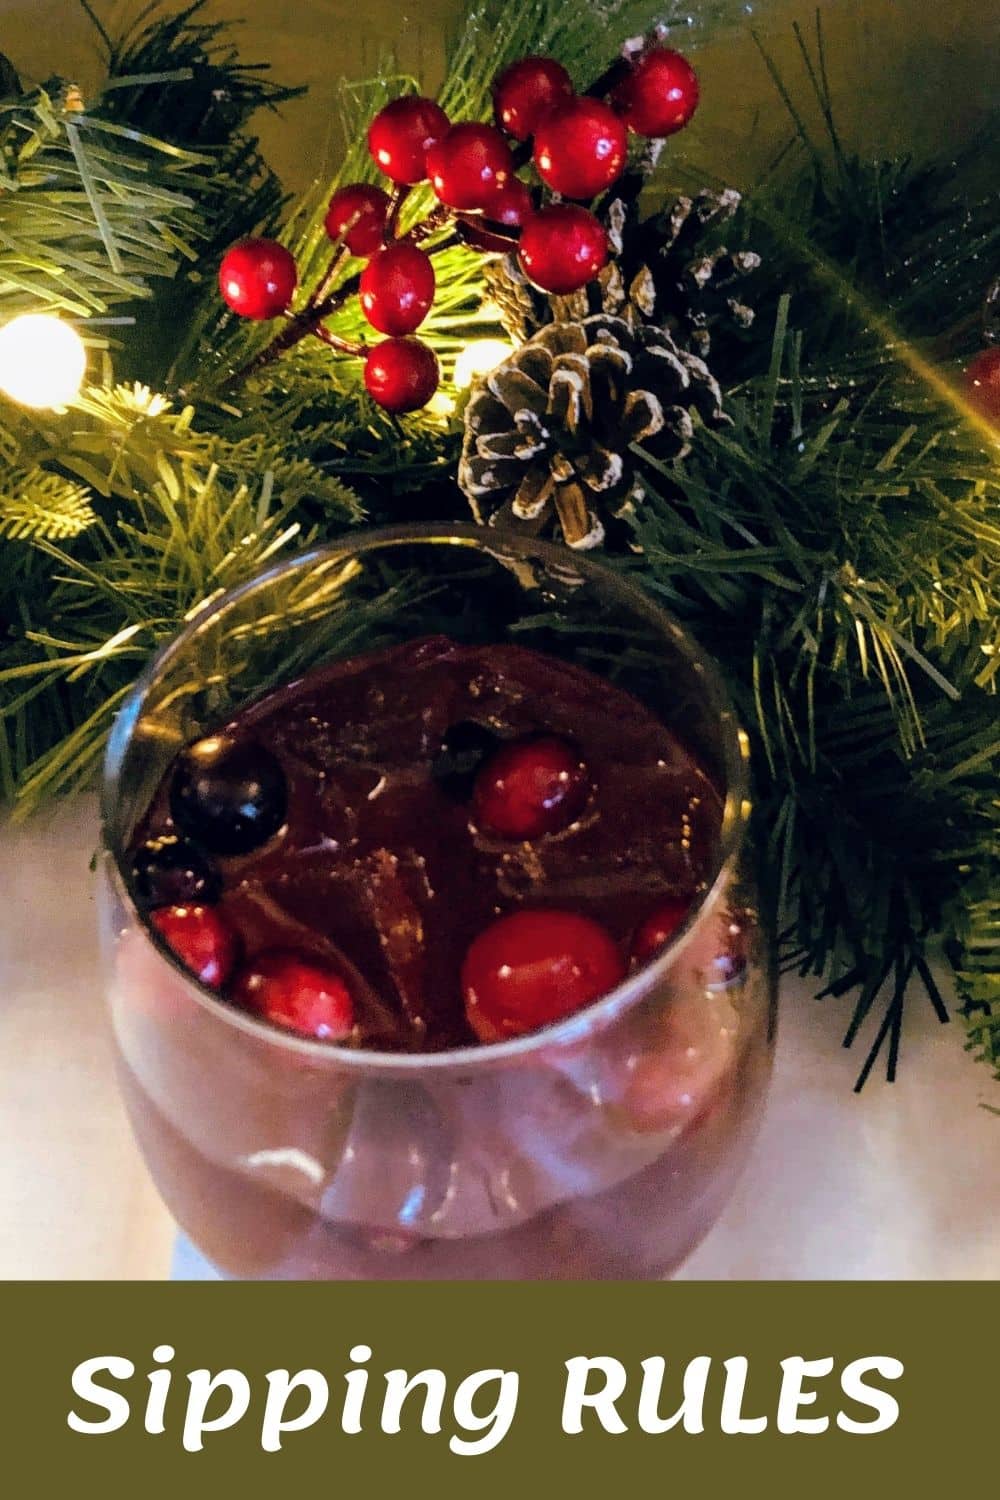 Sipping RULES for Cherry Christmas Amaretto cocktails